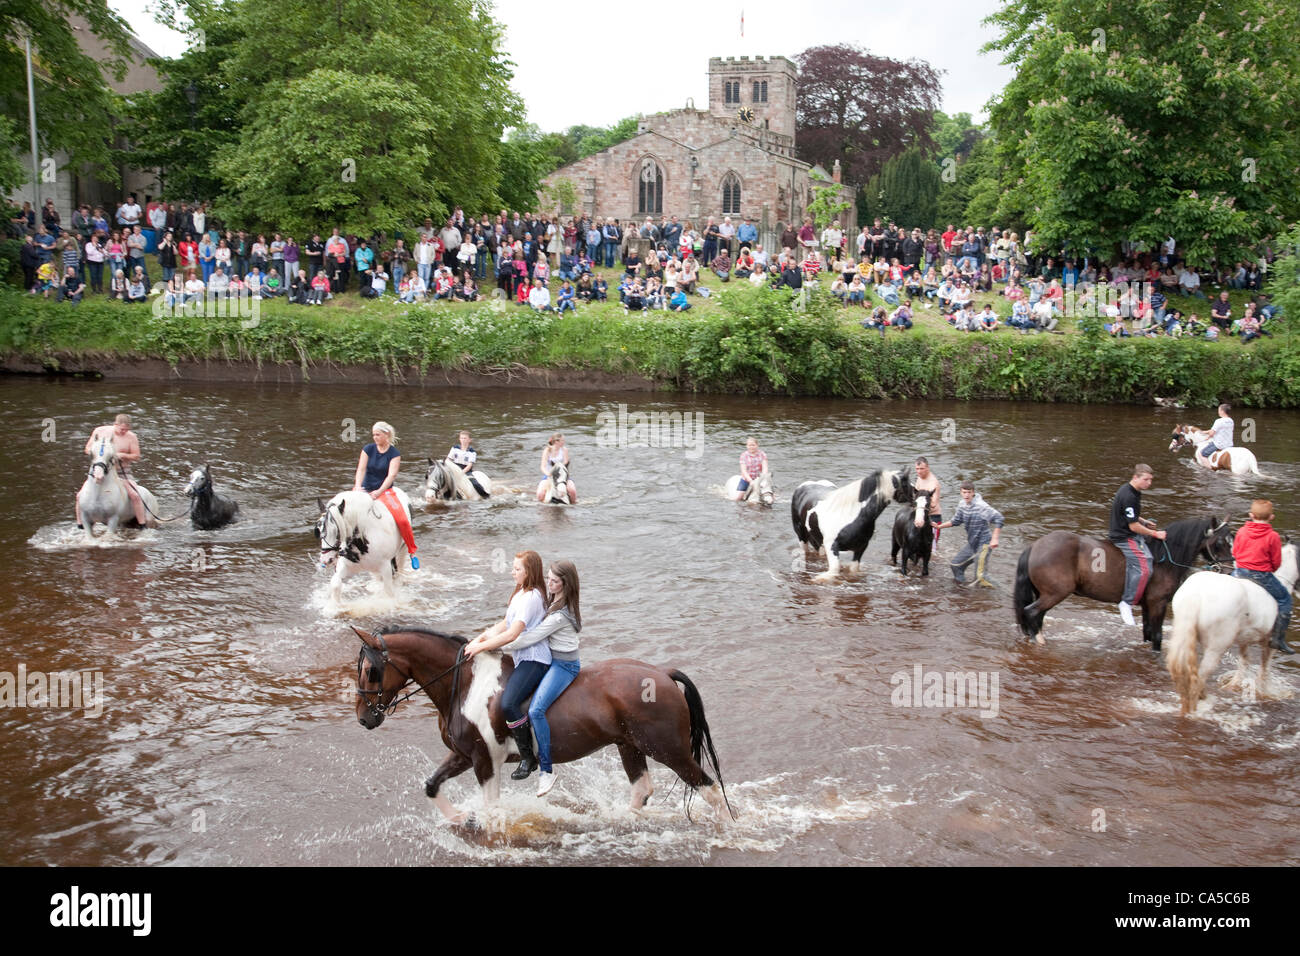 10th June 2012 at Appleby, Cumbria, UK. Horses washing in the river Eden. Sunday is traditionally a busy day for horse trading and visitor attendance at the Appleby Fair, the biggest annual gathering of Gypsies and Travellers in Europe. Stock Photo